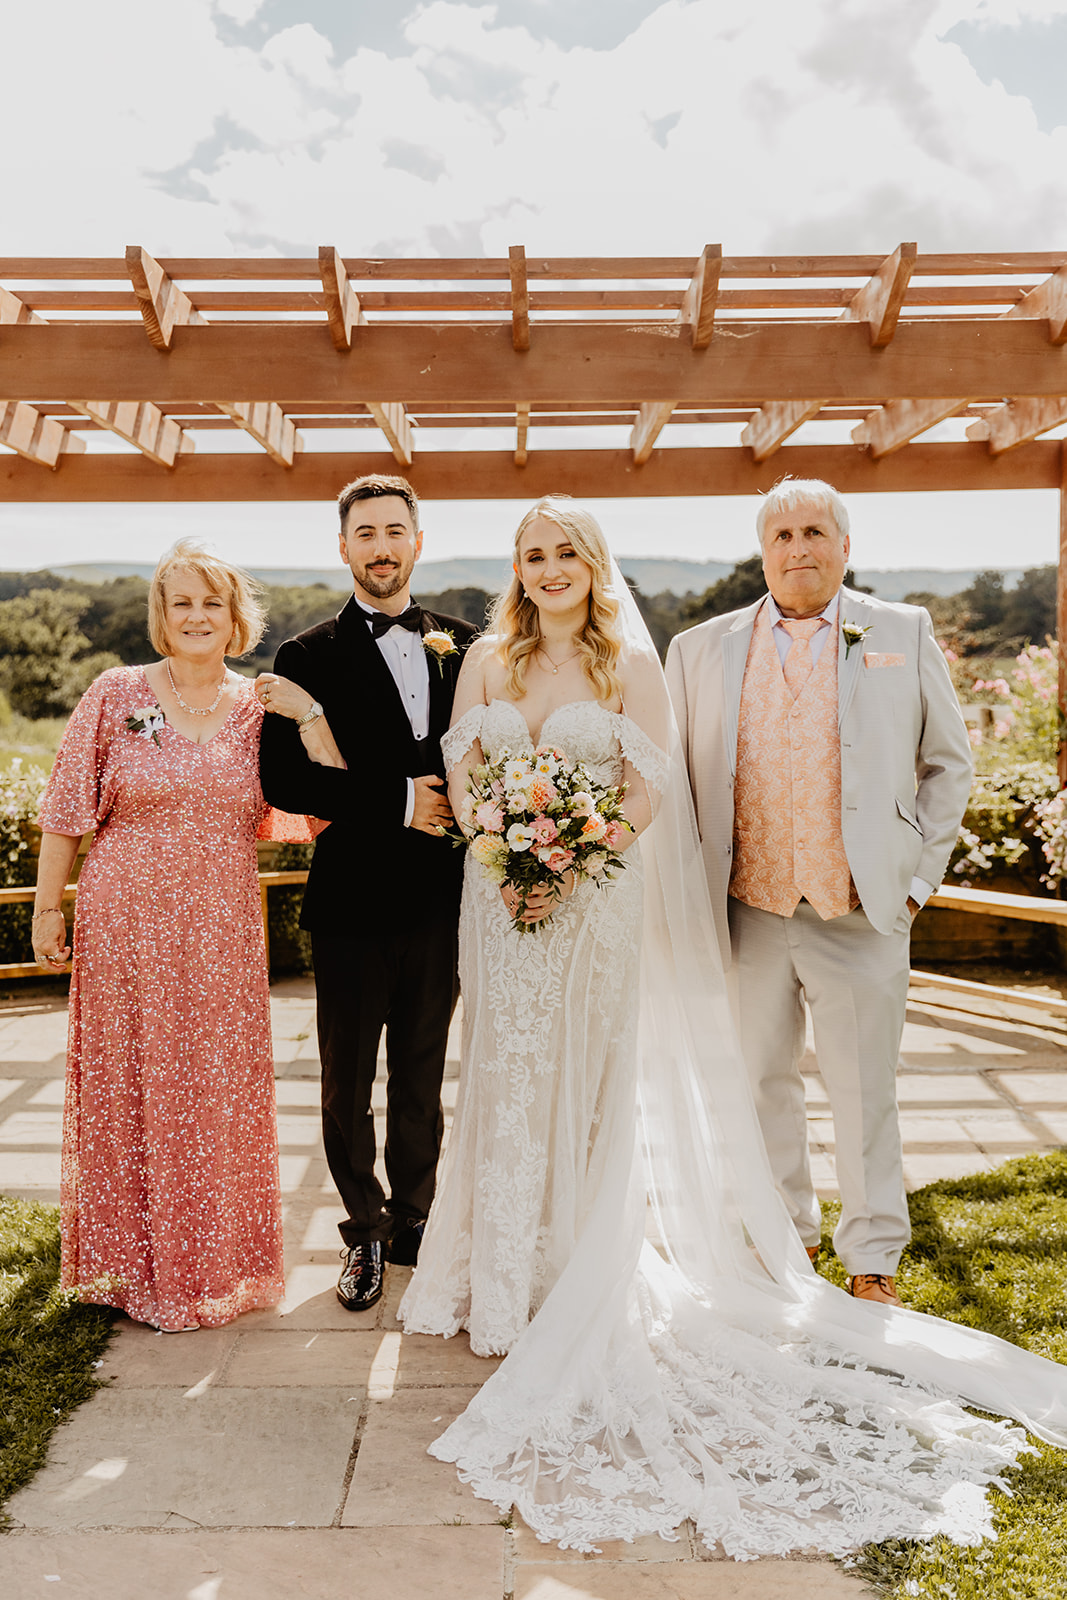 Family photos at a Southlands barn wedding, Sussex. Photo by OliveJoy Photography.